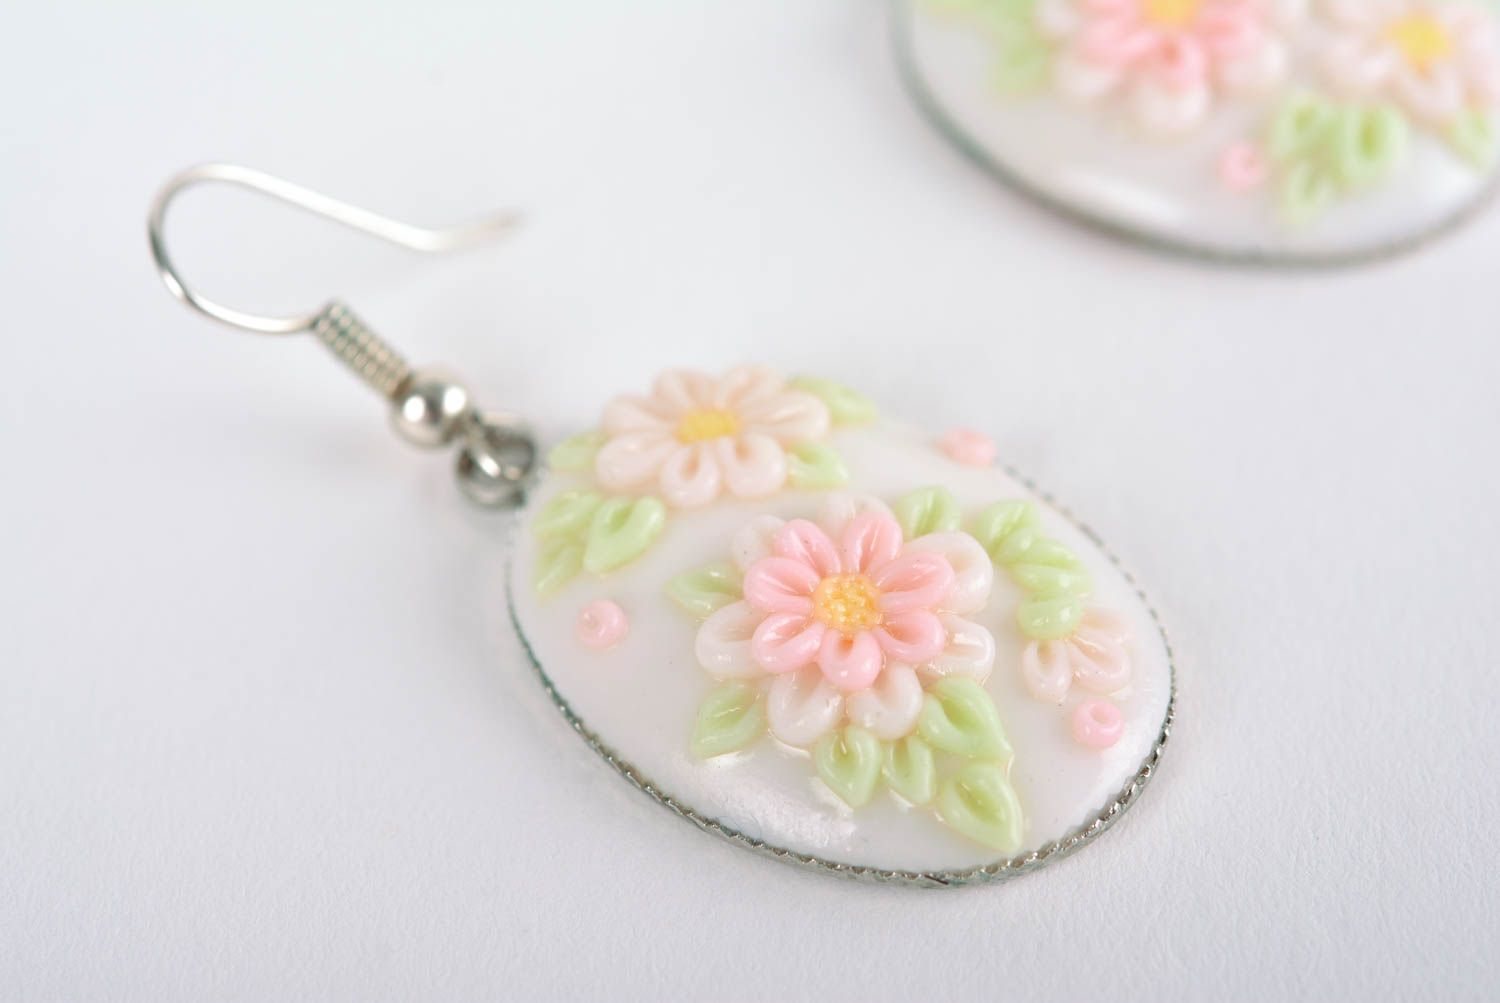 Handmade plastic earrings polymer clay jewelry fashion accessories for women photo 2